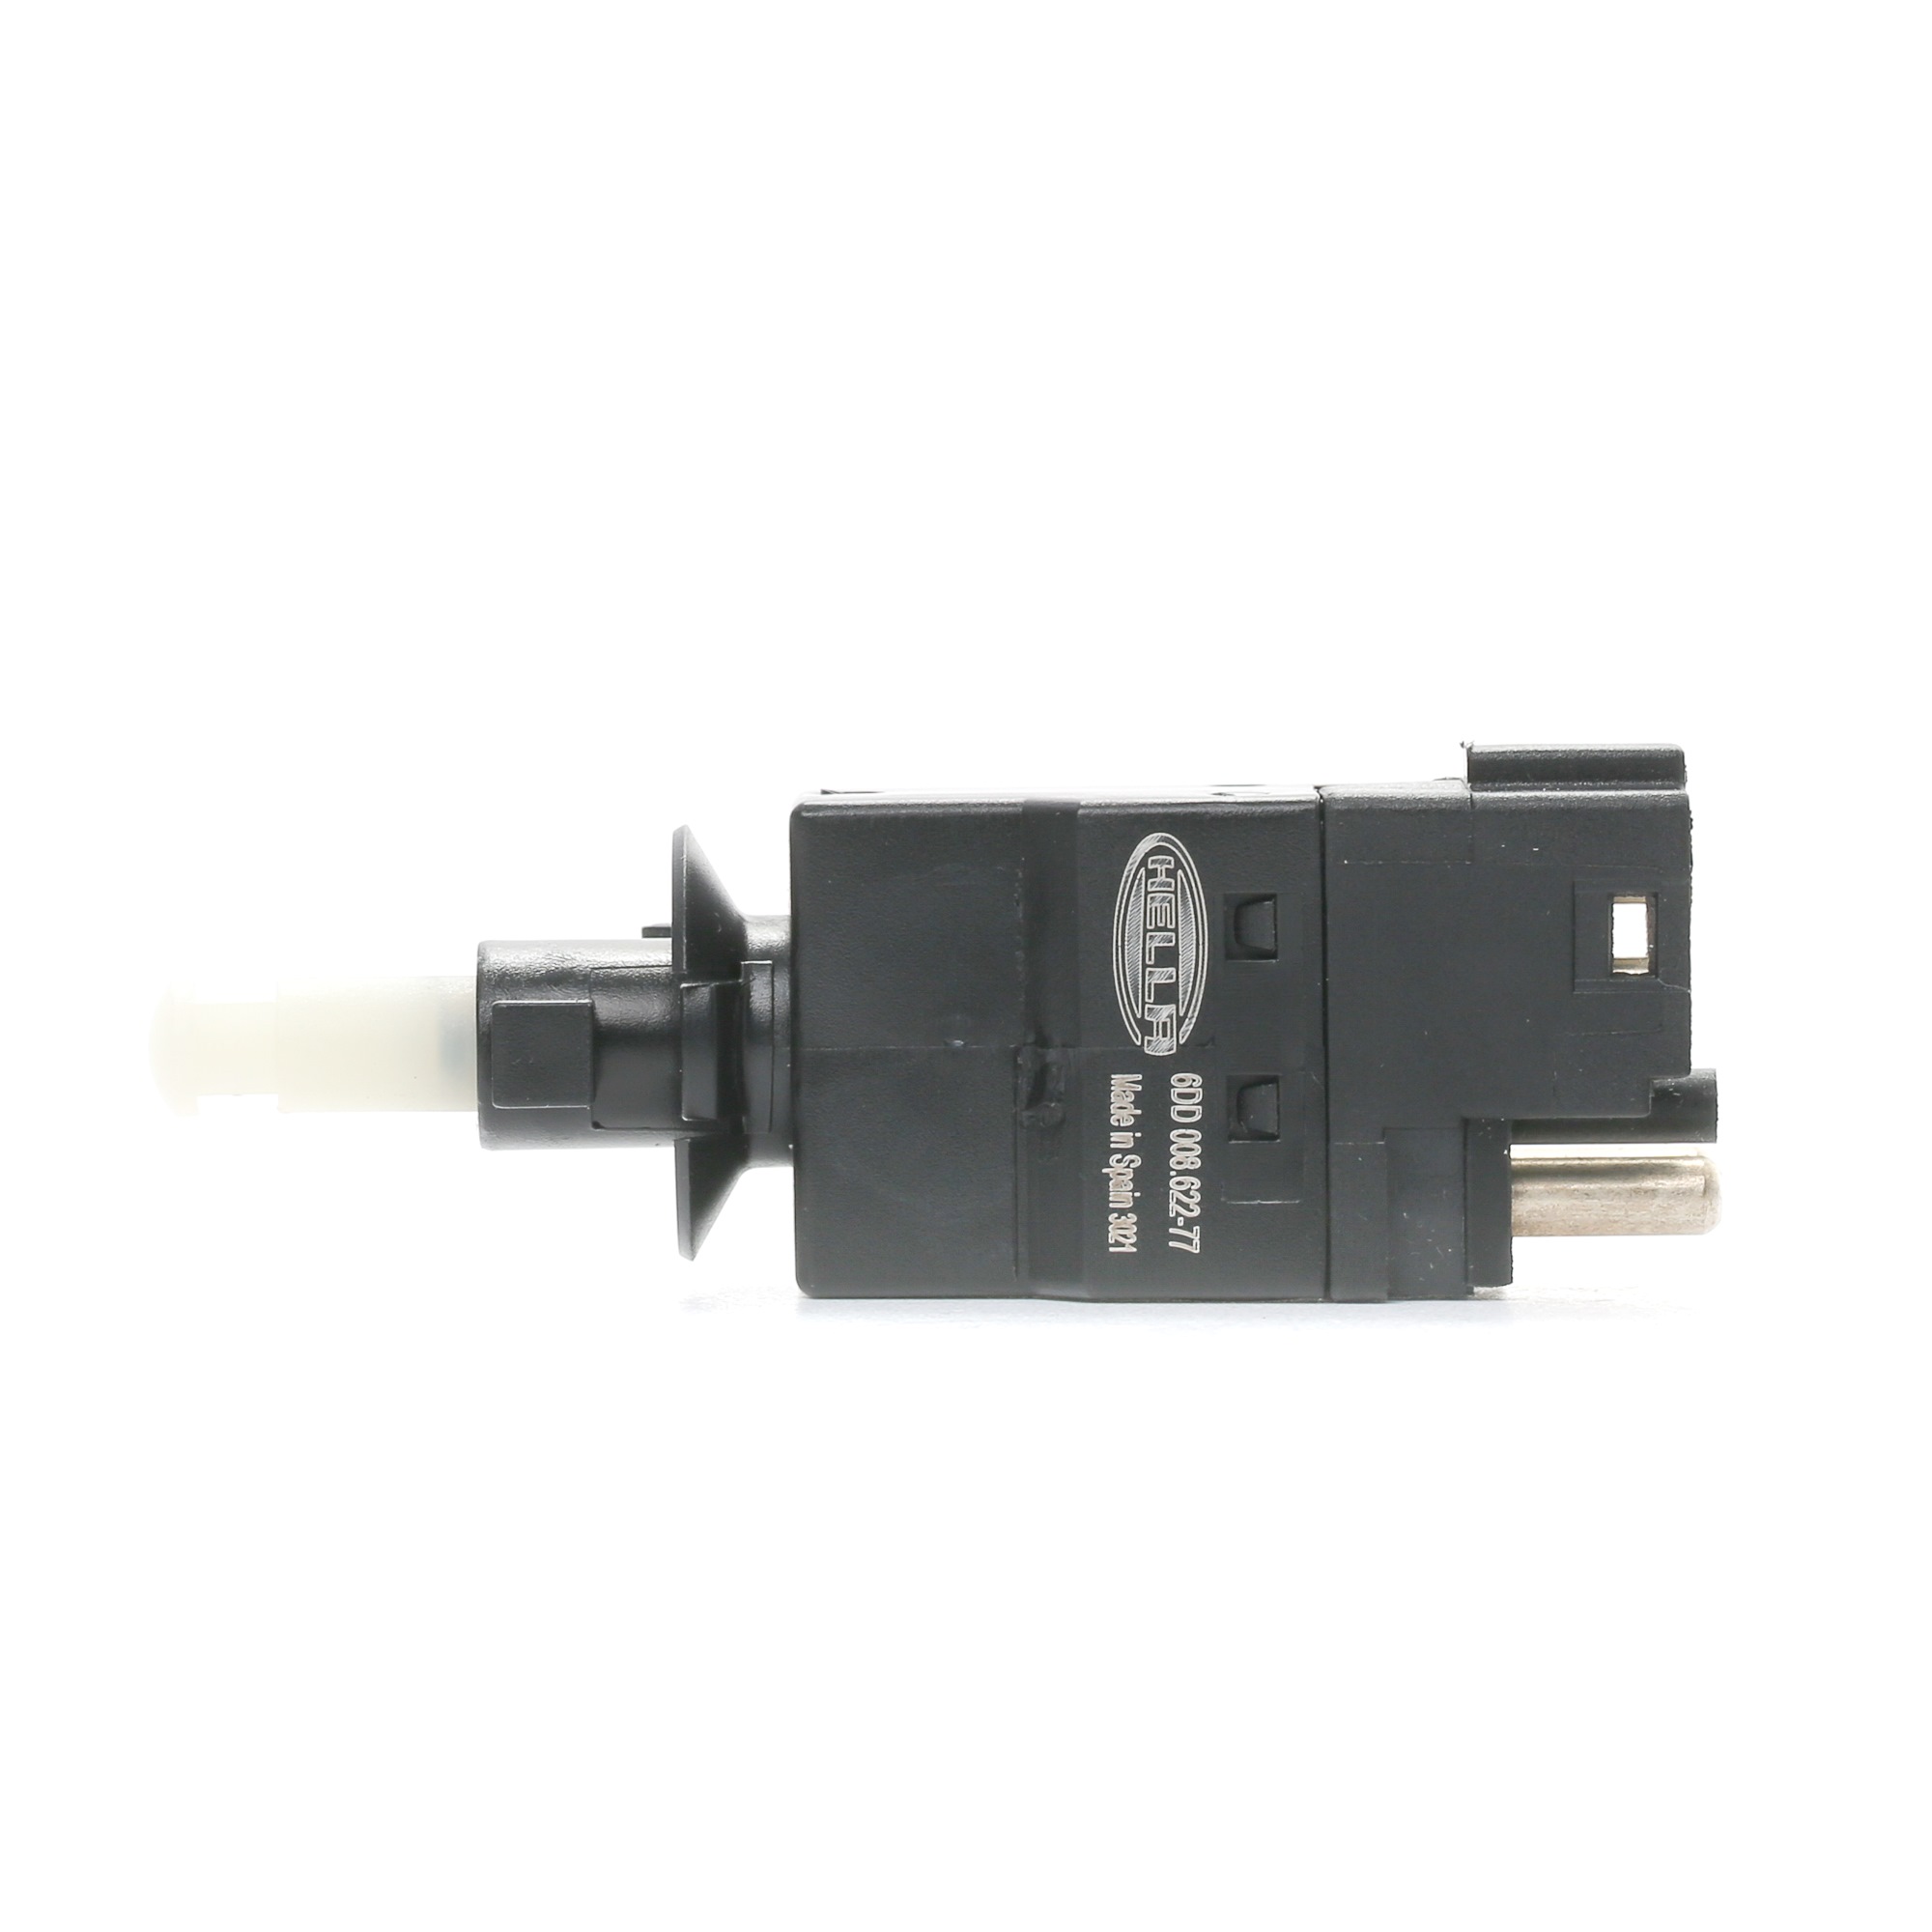 HELLA Electric, 4-pin connector, 12V Number of pins: 4-pin connector Stop light switch 6DD 008 622-771 buy